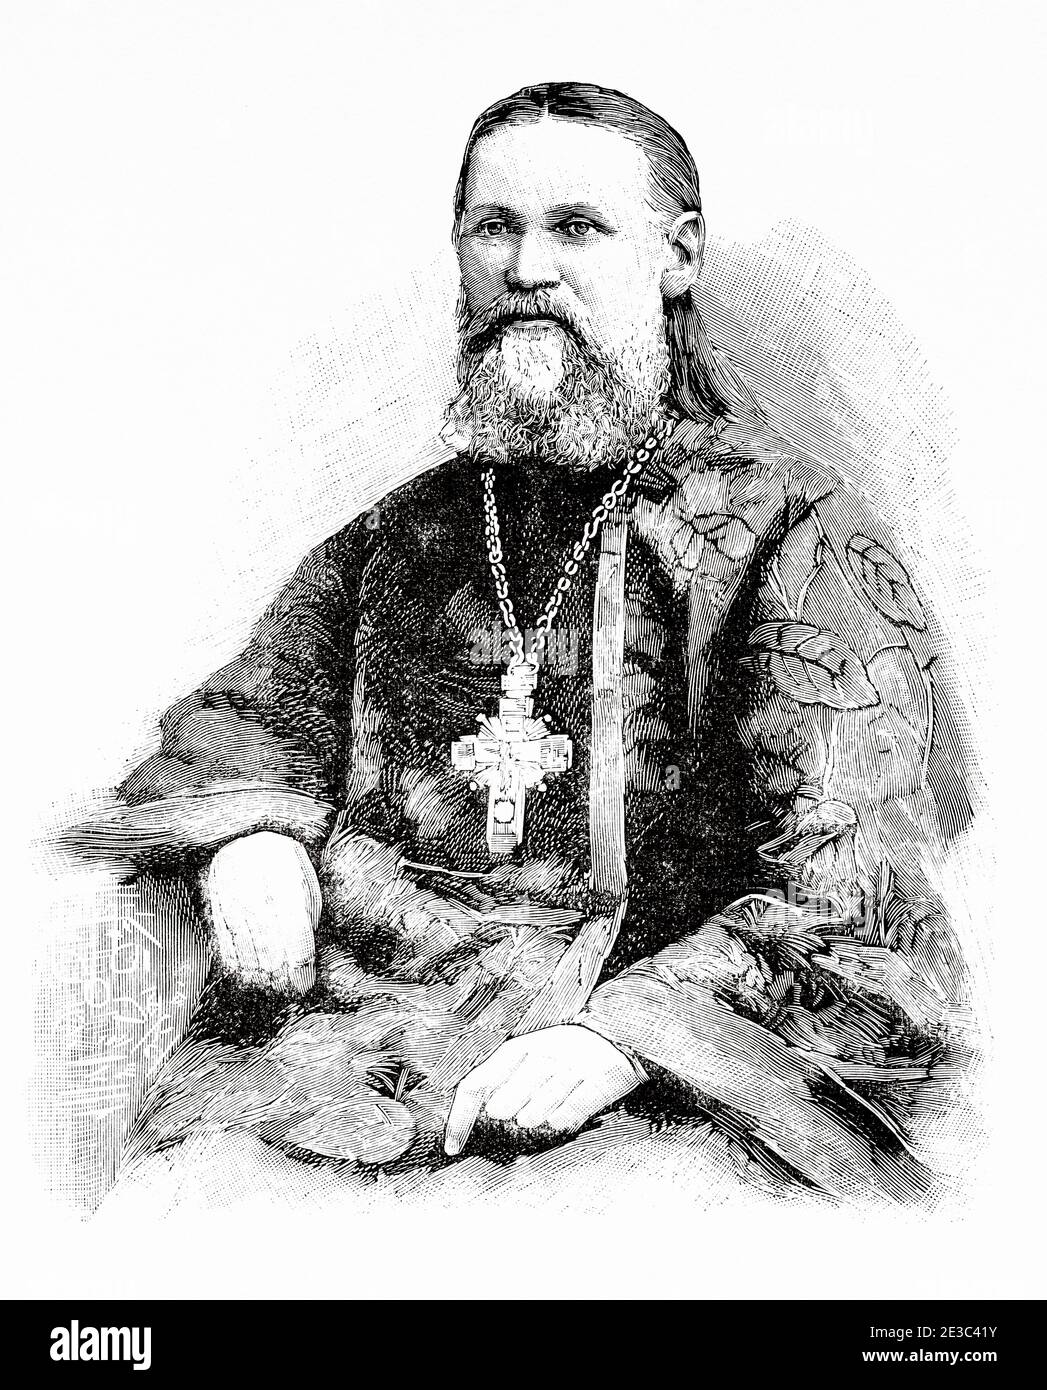 Portrait of Saint John of Kronstadt (1829-1908) Russian Orthodox archpriest and a member of the Synod of the Russian Orthodox Church, Russia. Old XIX century engraved illustration from La Ilustracion Española y Americana 1894 Stock Photo